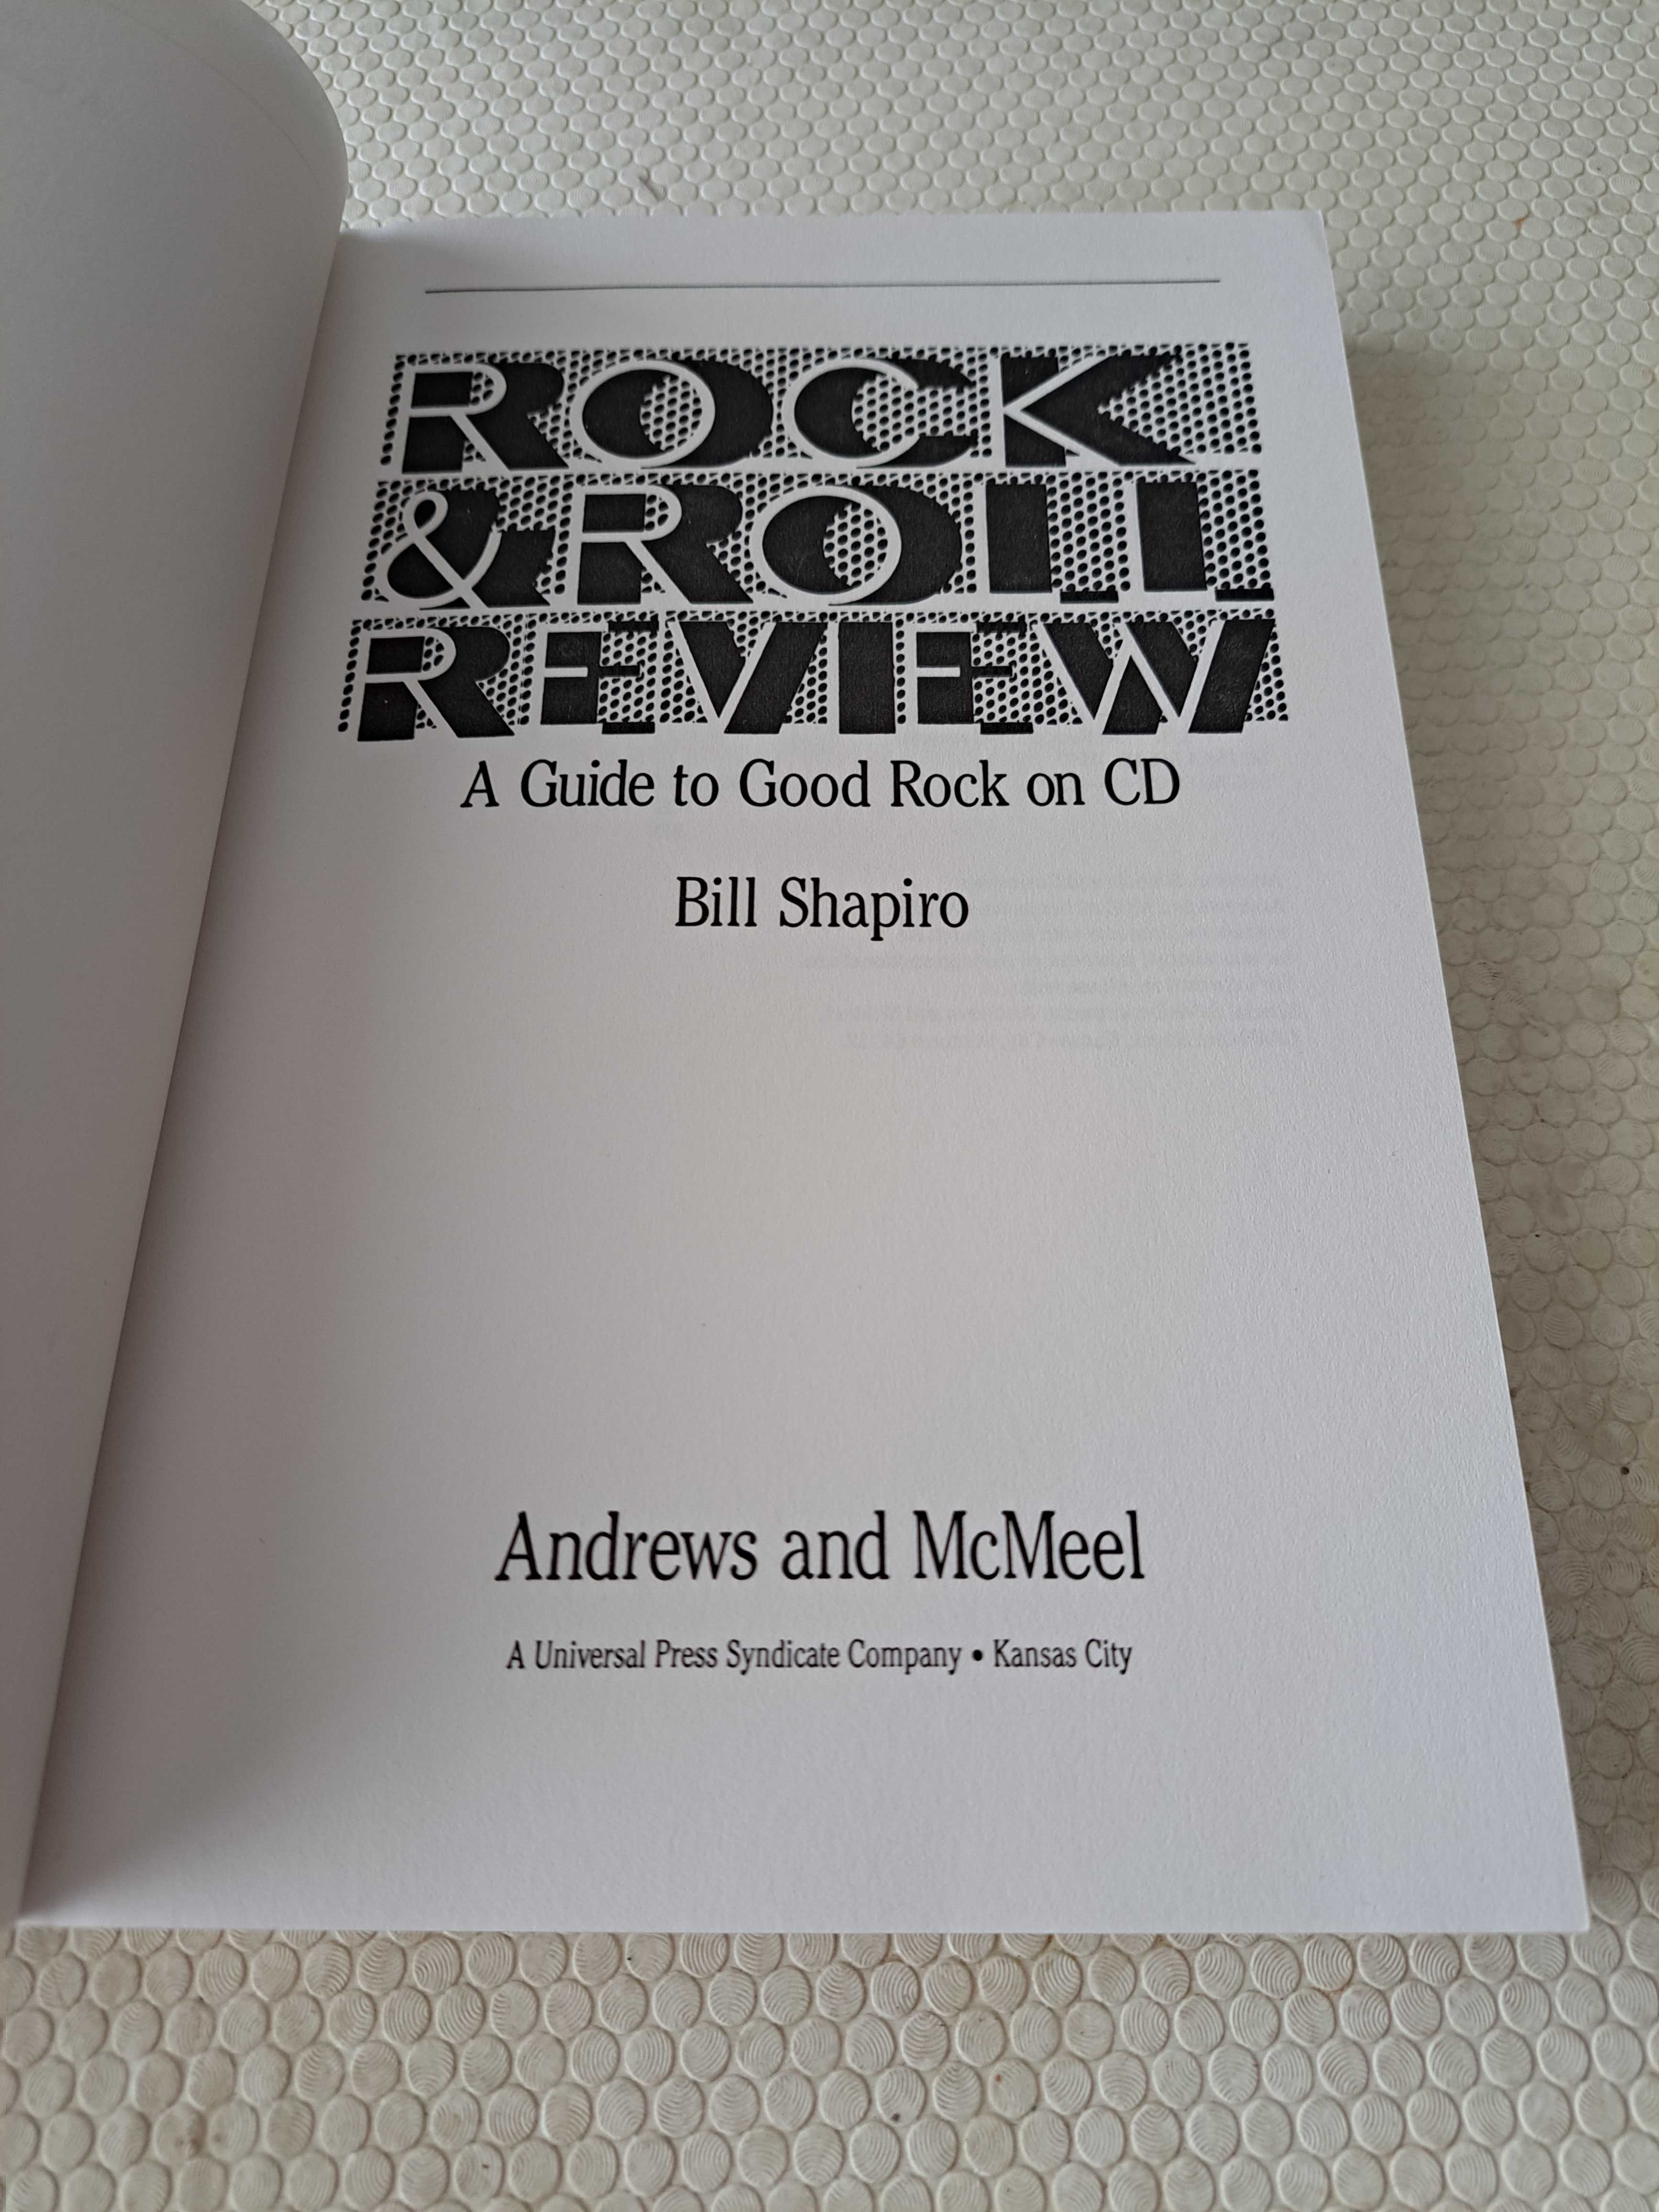 Rock & Roll Review - A Guide to Good Rock on CD - Bill Shapiro